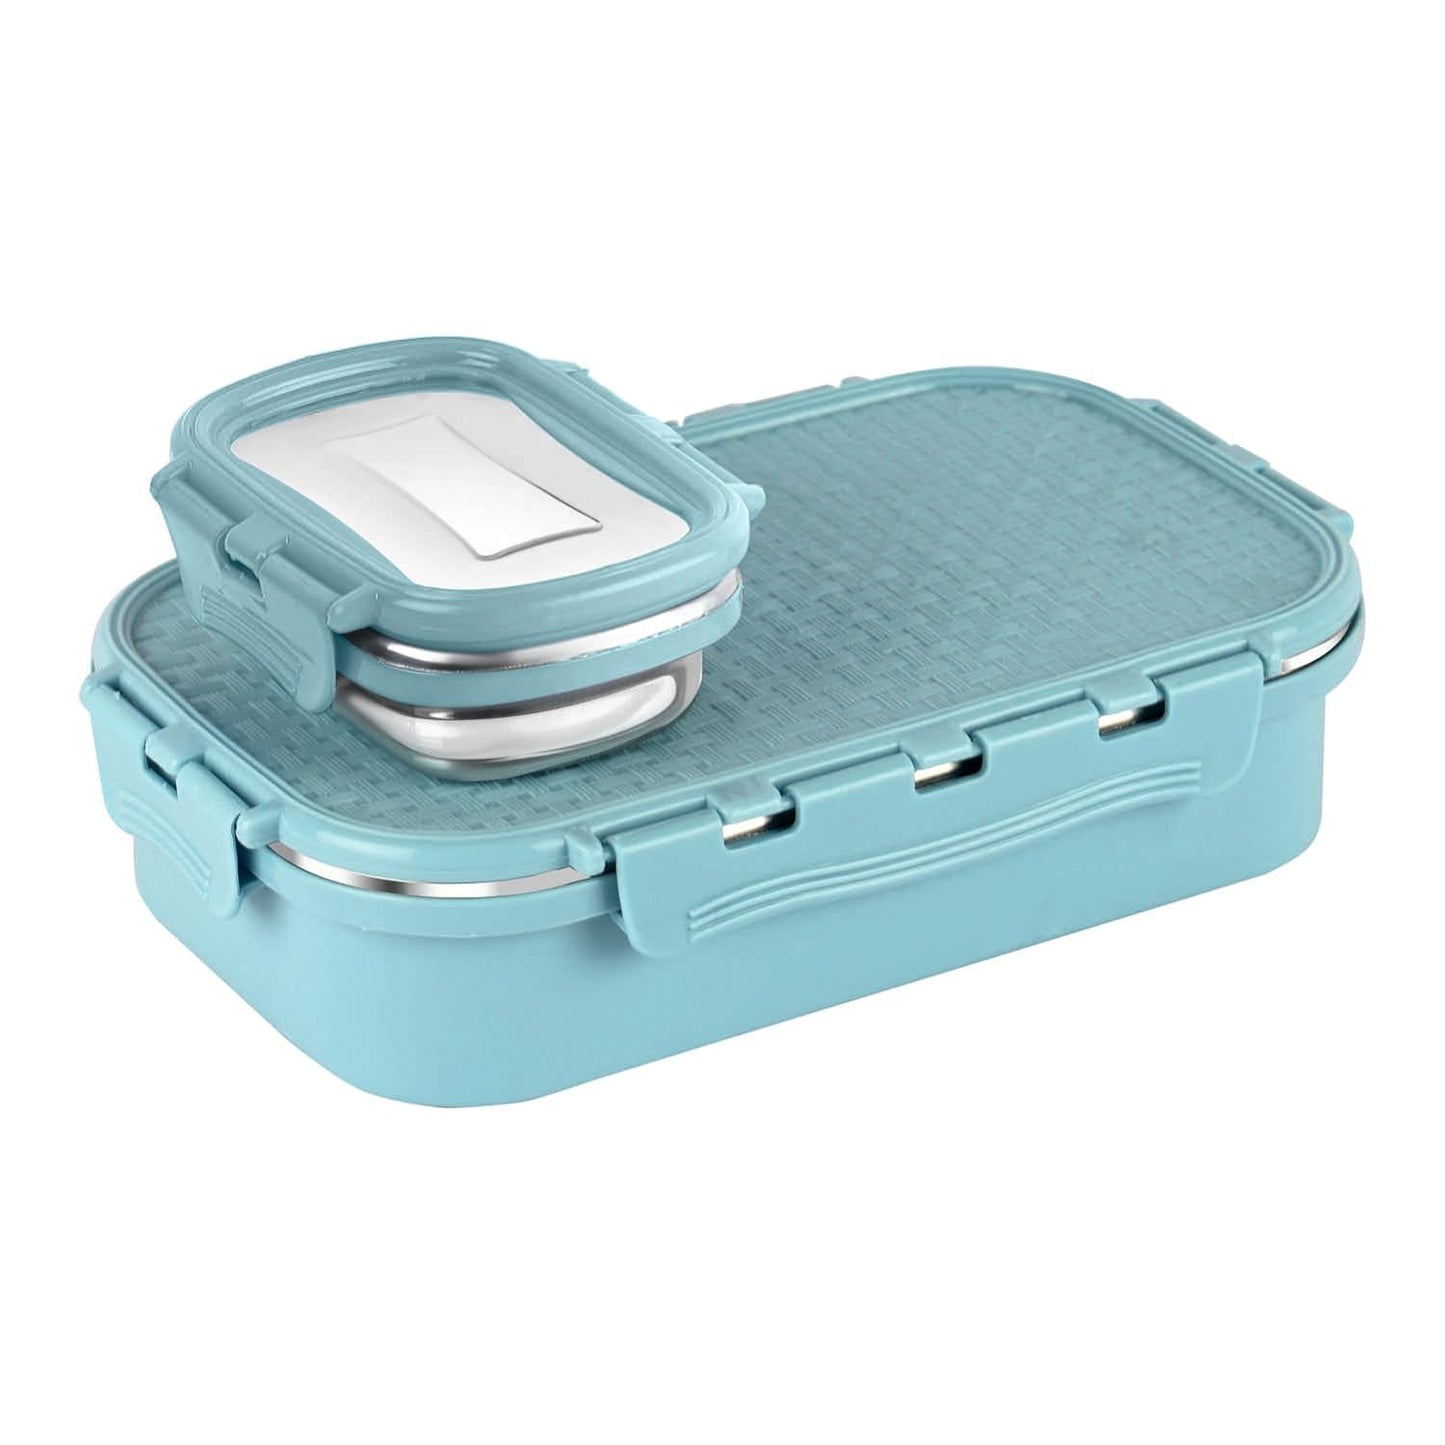 CELLO Matrix Medium size Lunch box for kids and adults both tiffin box